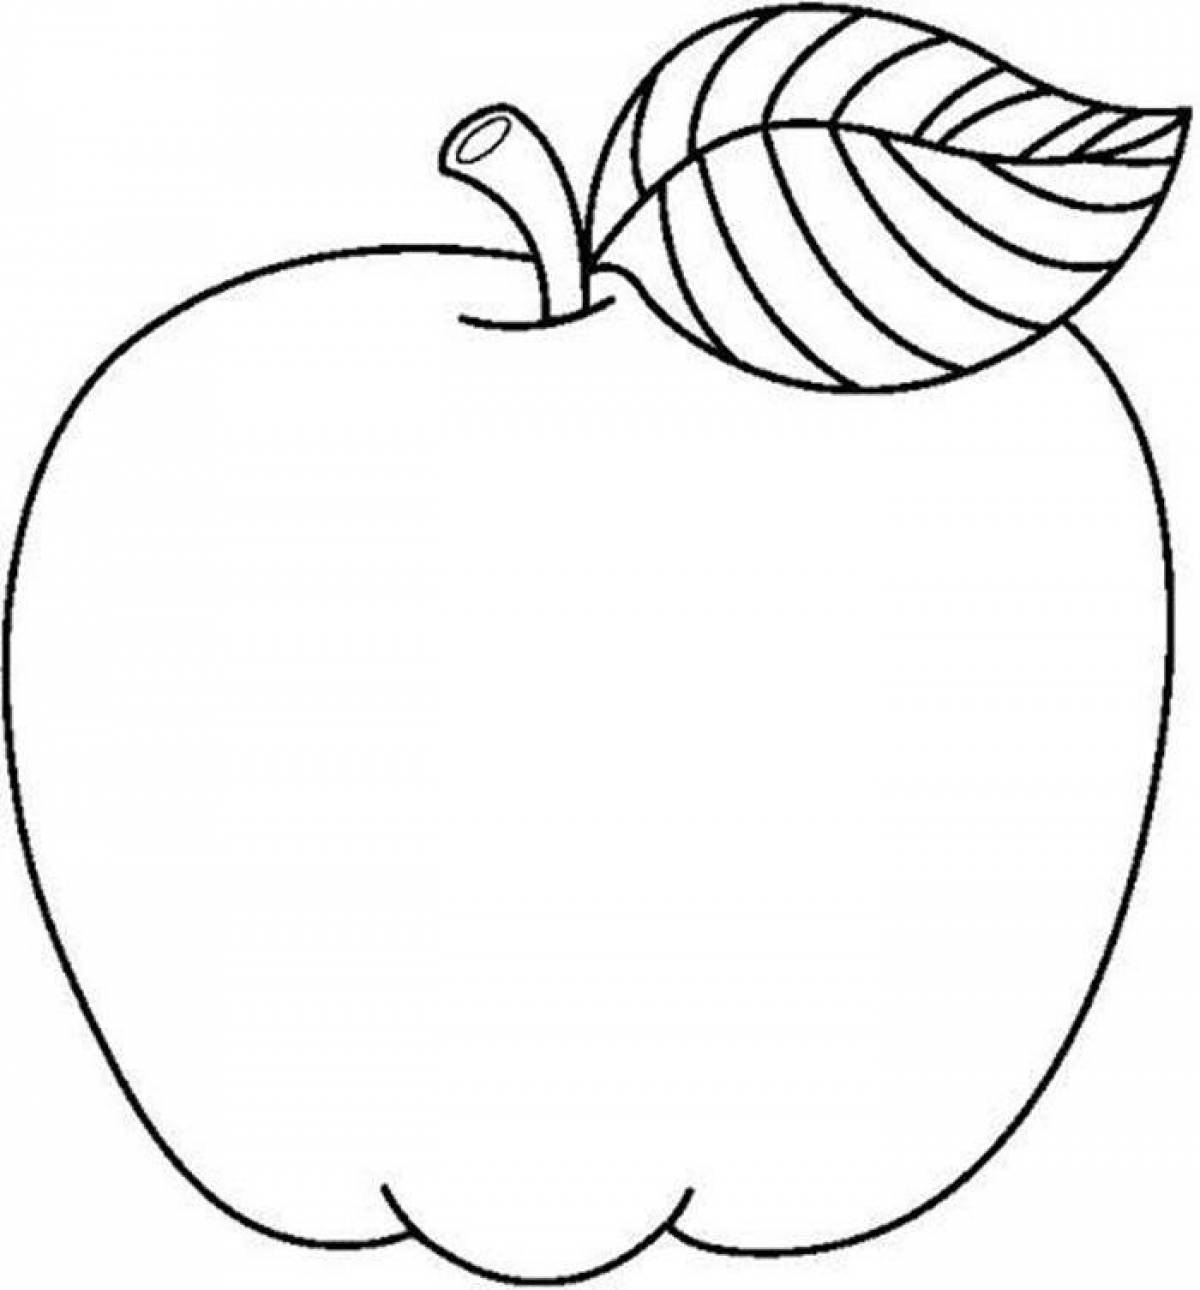 Glitter apples coloring book for kids